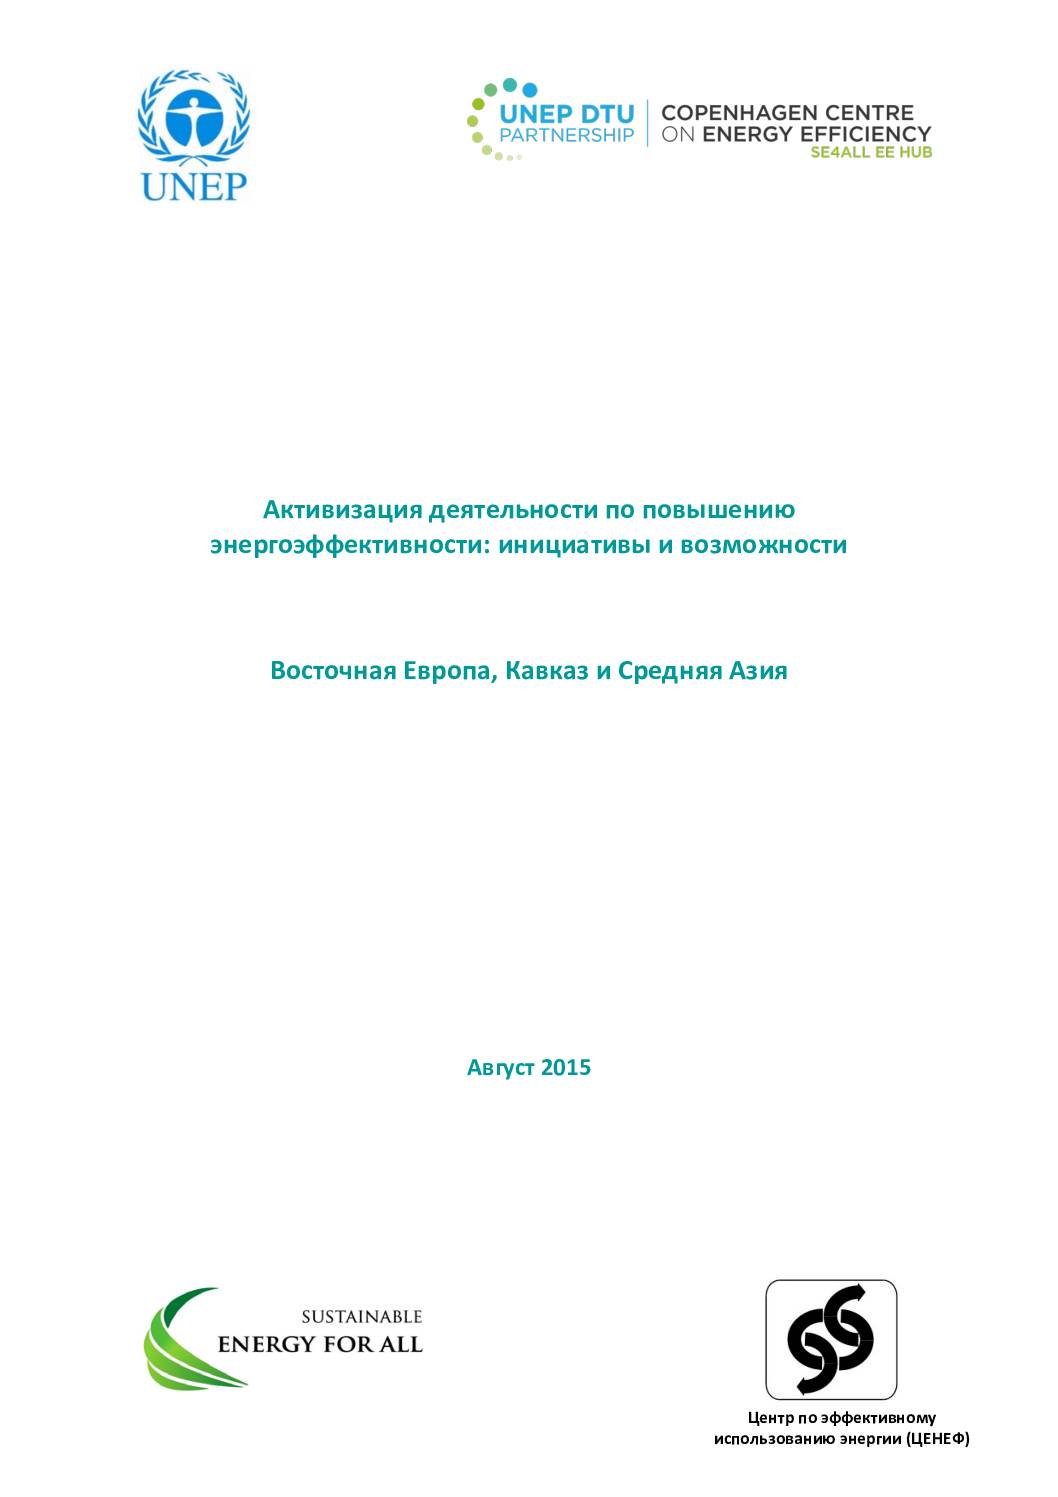 Accelerating Energy Efficiency: Initiatives and Opportunities – Eastern Europe, the Caucasus and Central Asia (Russian version)